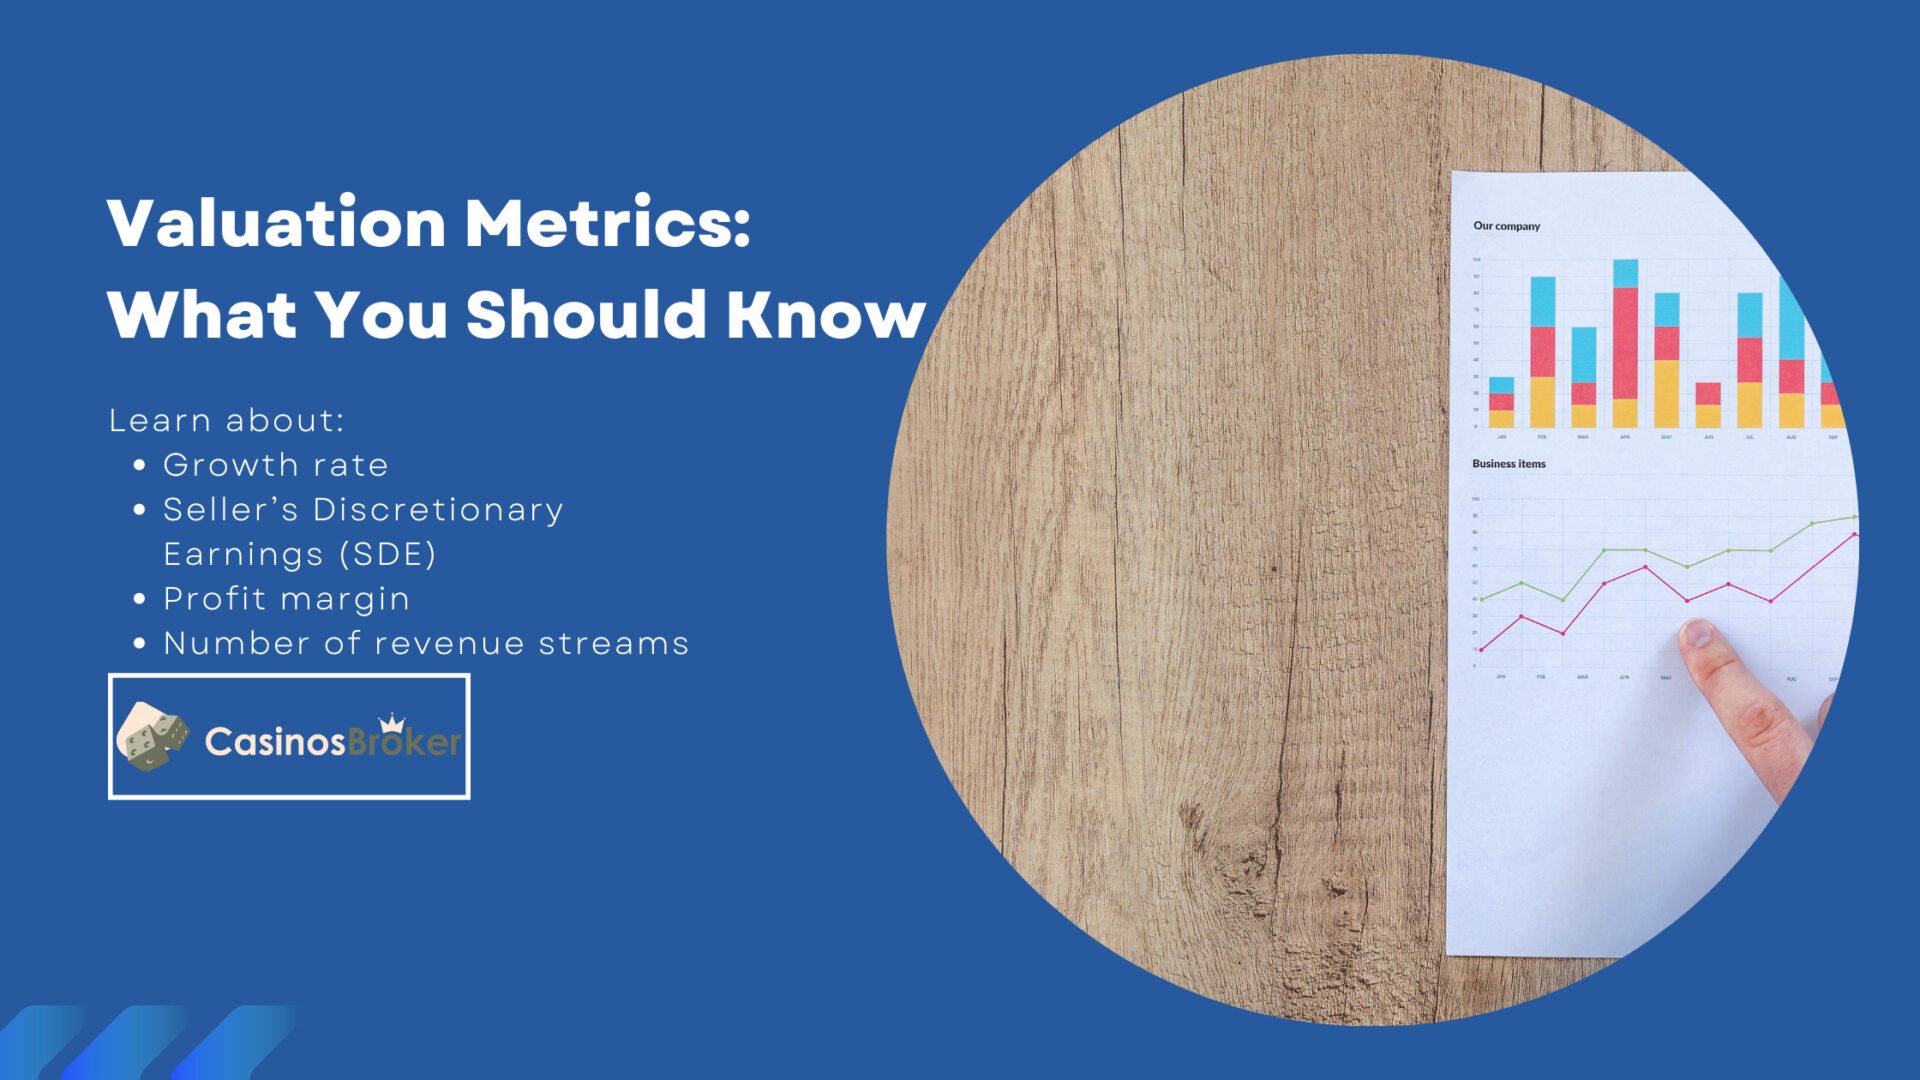 Valuation Metrics: What You Should Know